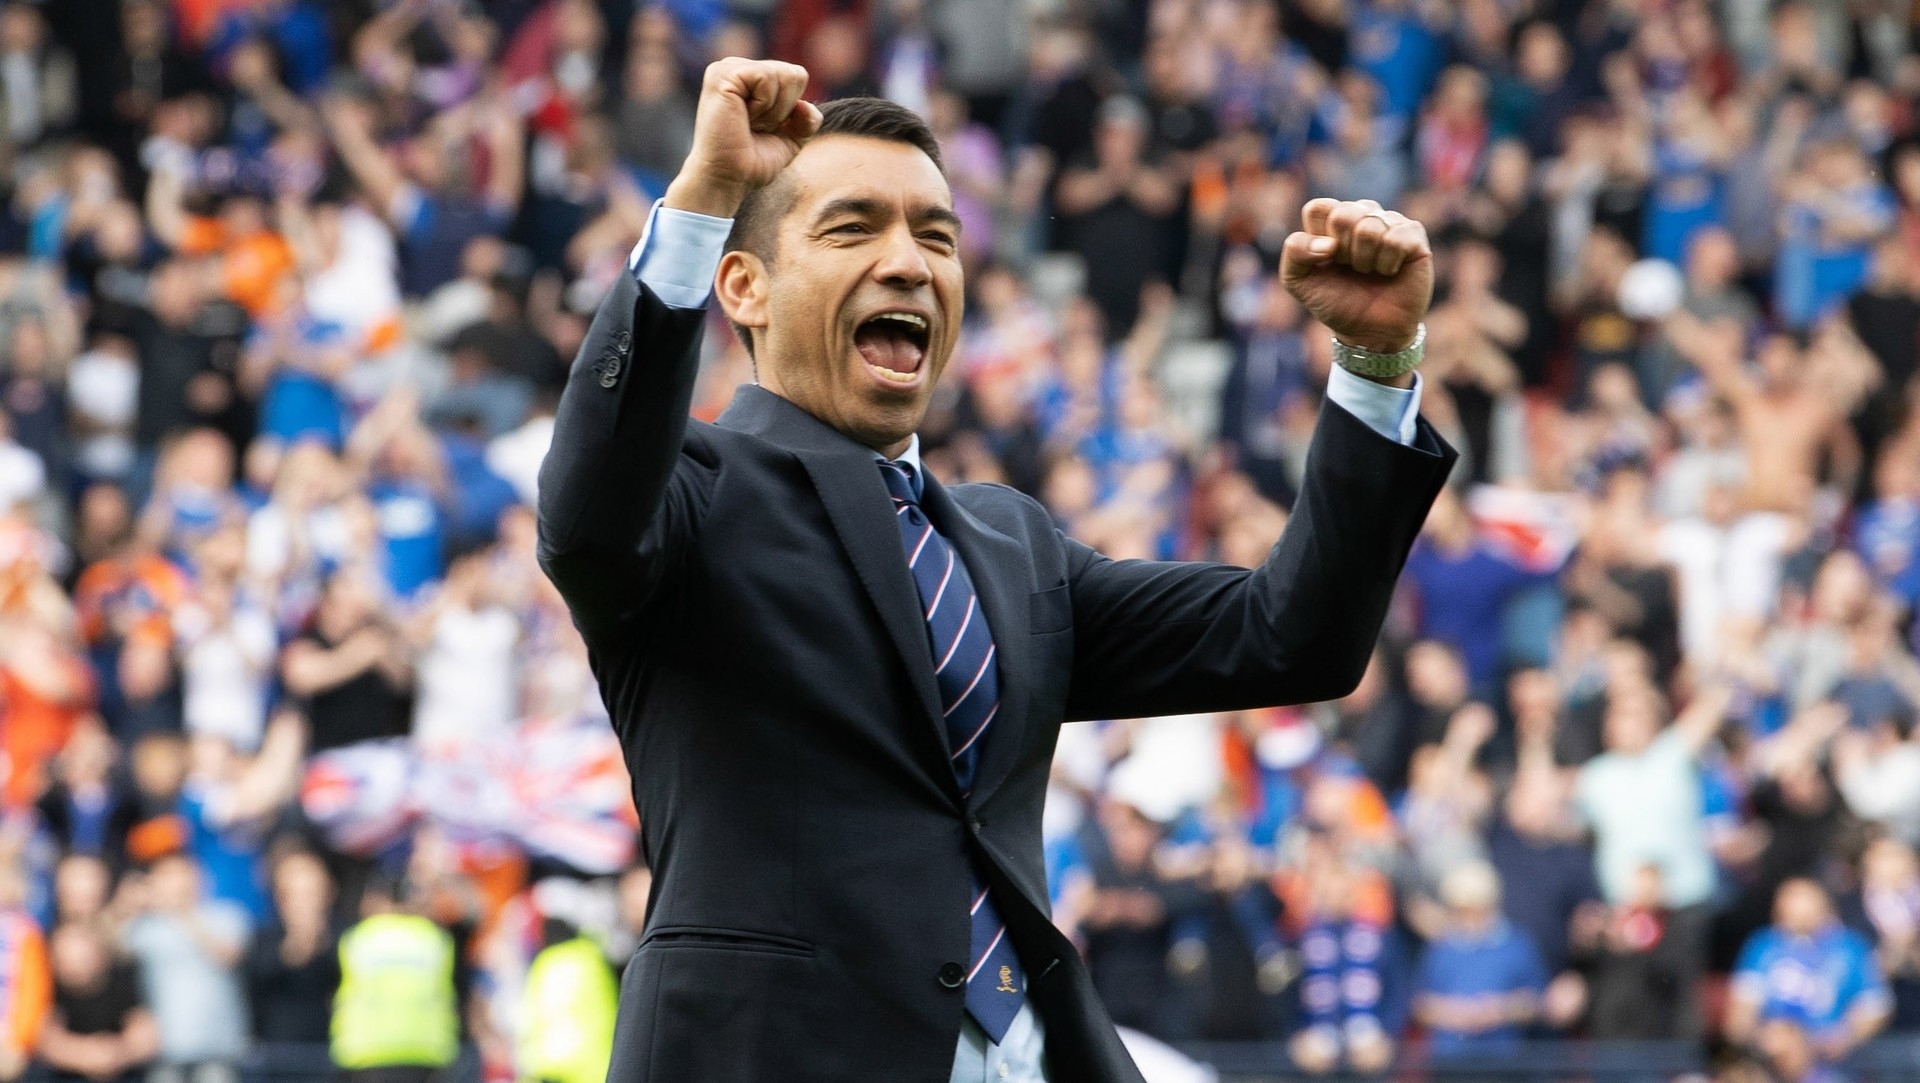 Van Bronckhorst has a 100% record in domestic cup games but results elsewhere have been less pleasing for the Dutchman. (Photo by Alan Harvey / SNS Group)